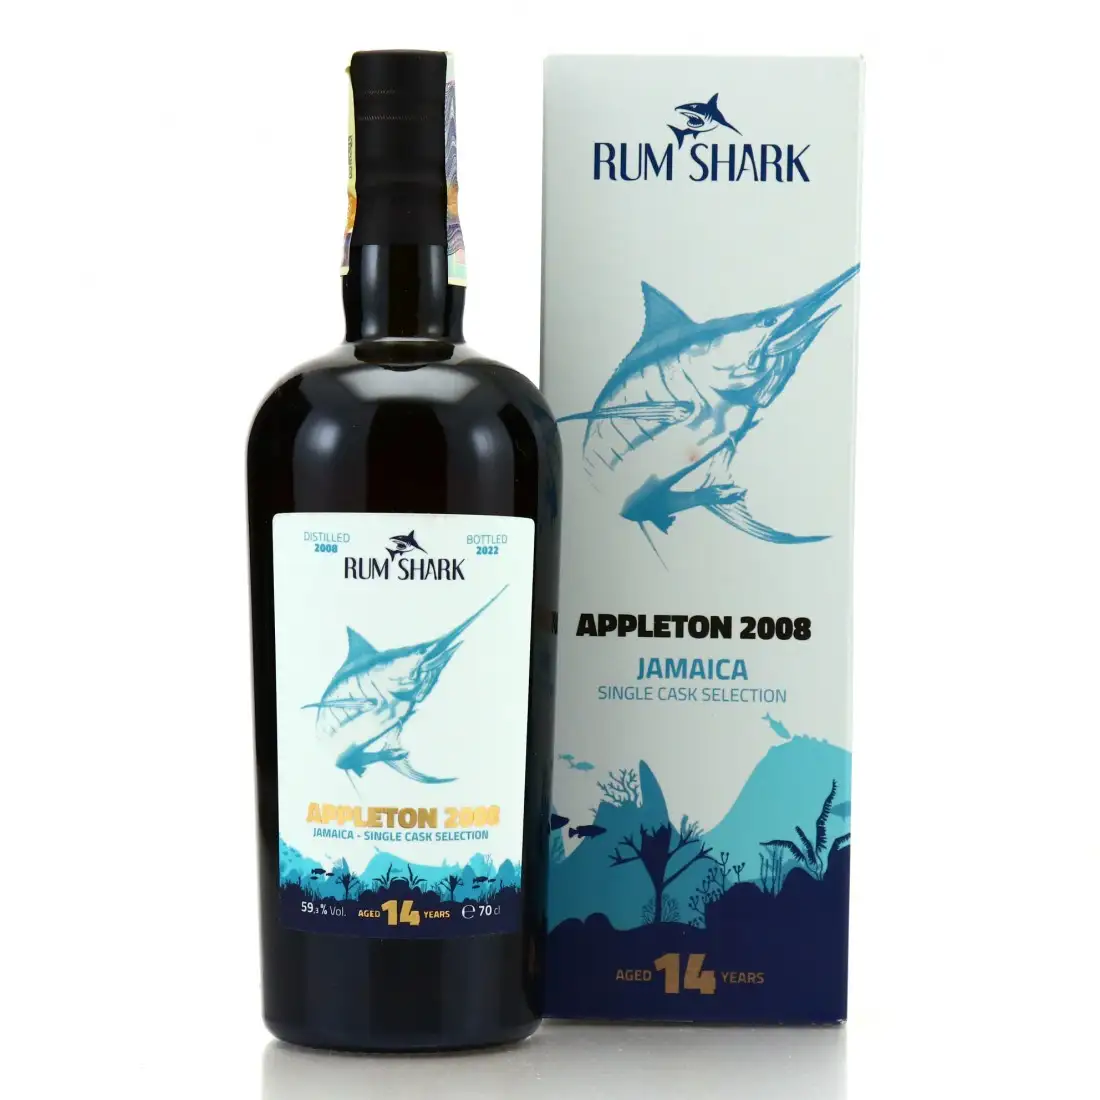 Image of the front of the bottle of the rum Jamaica Single Cask Selection